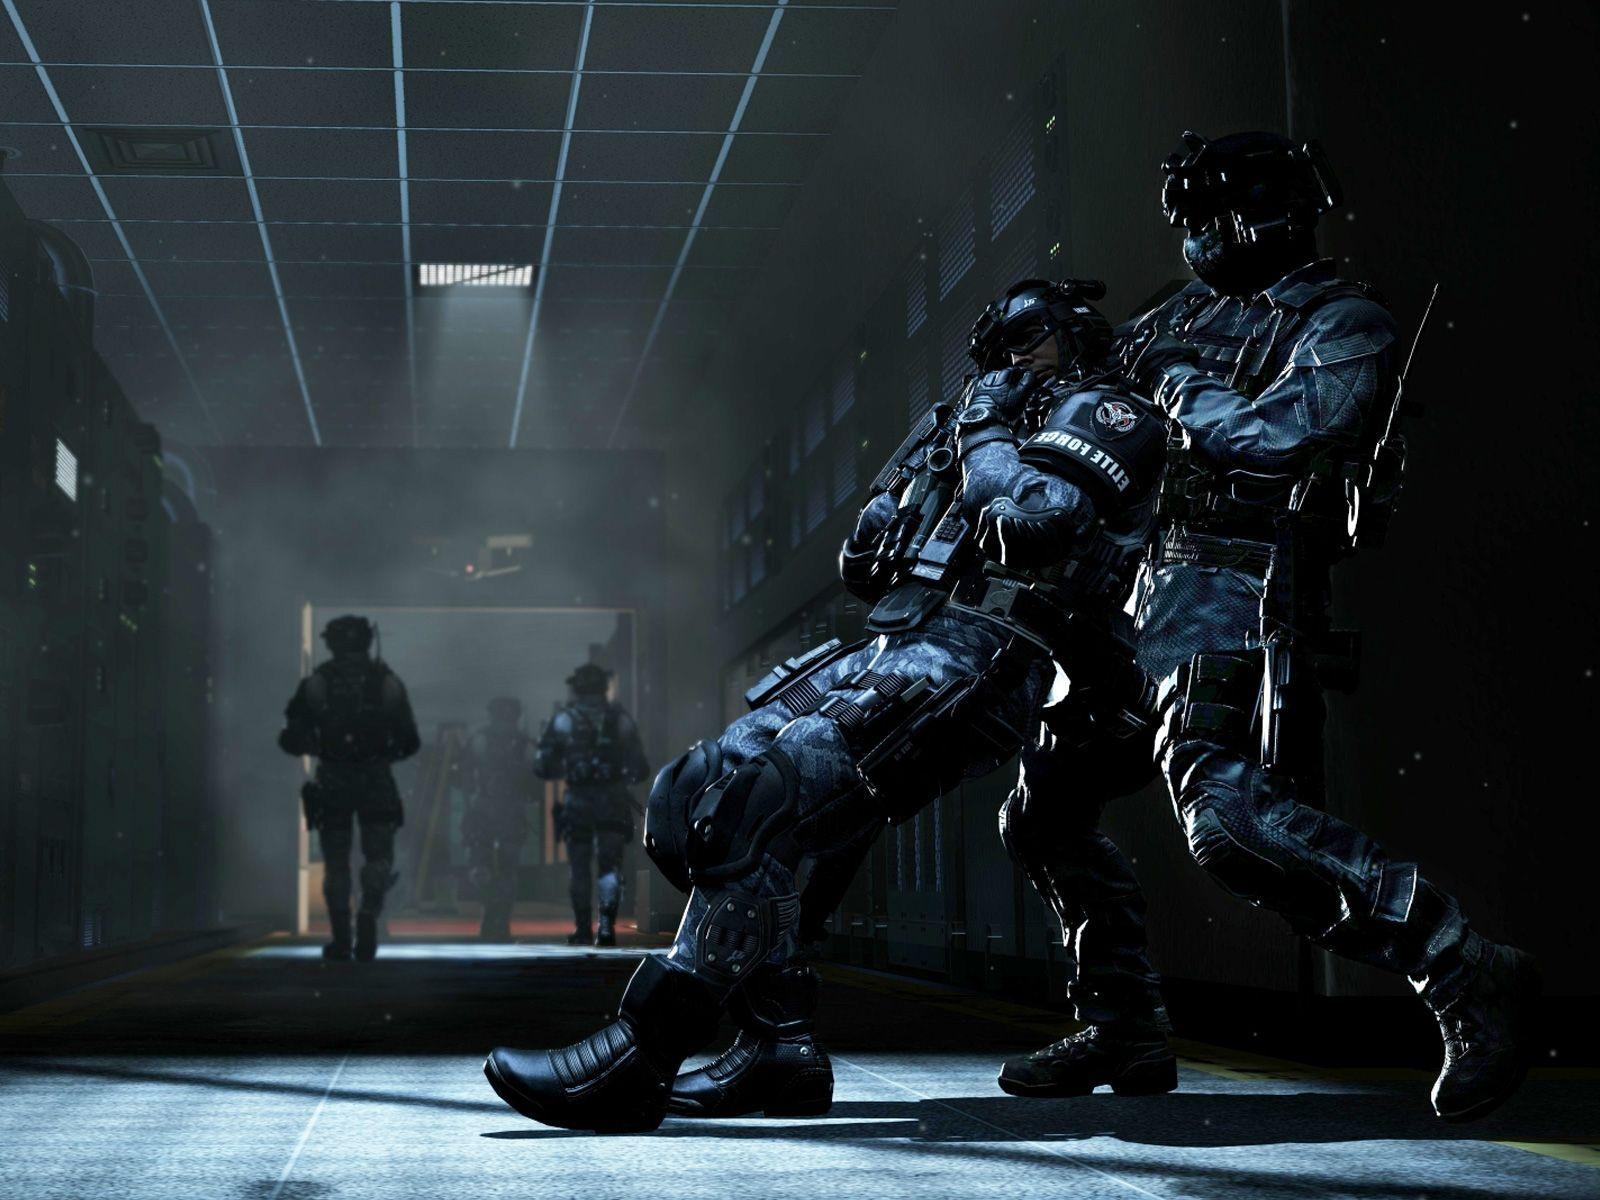 Call of Duty Ghosts Wallpaper 1600x1200 in HD cod ghosts. Call